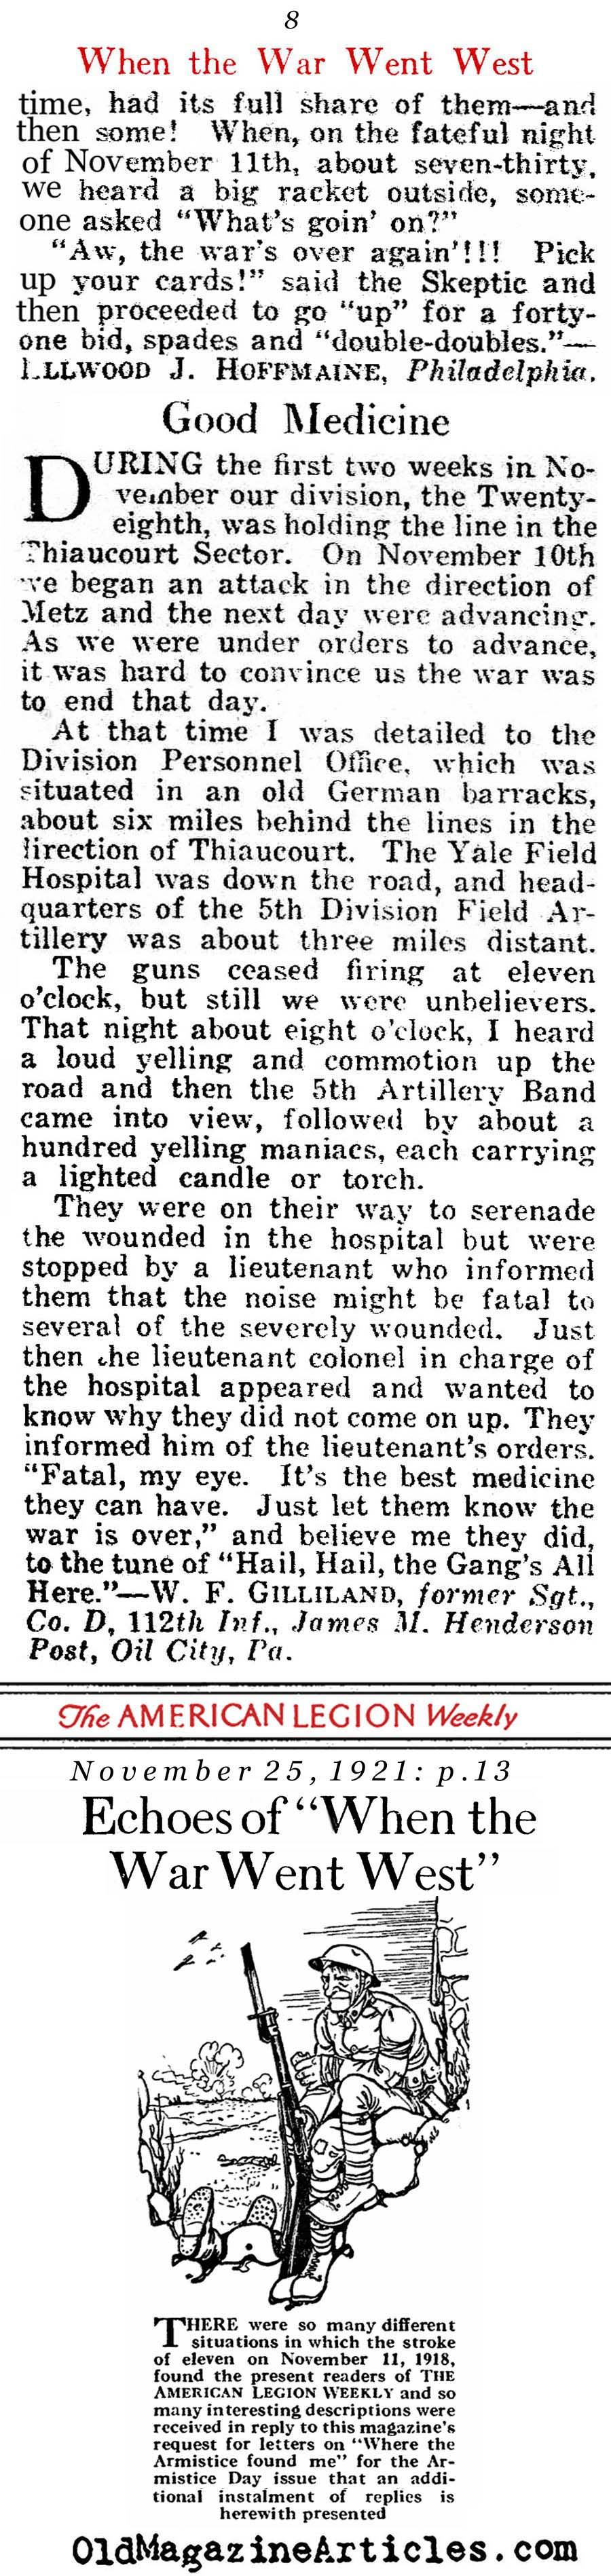 Where Were You When You Heard of The Armistice? (American Legion Weekly, 1921)